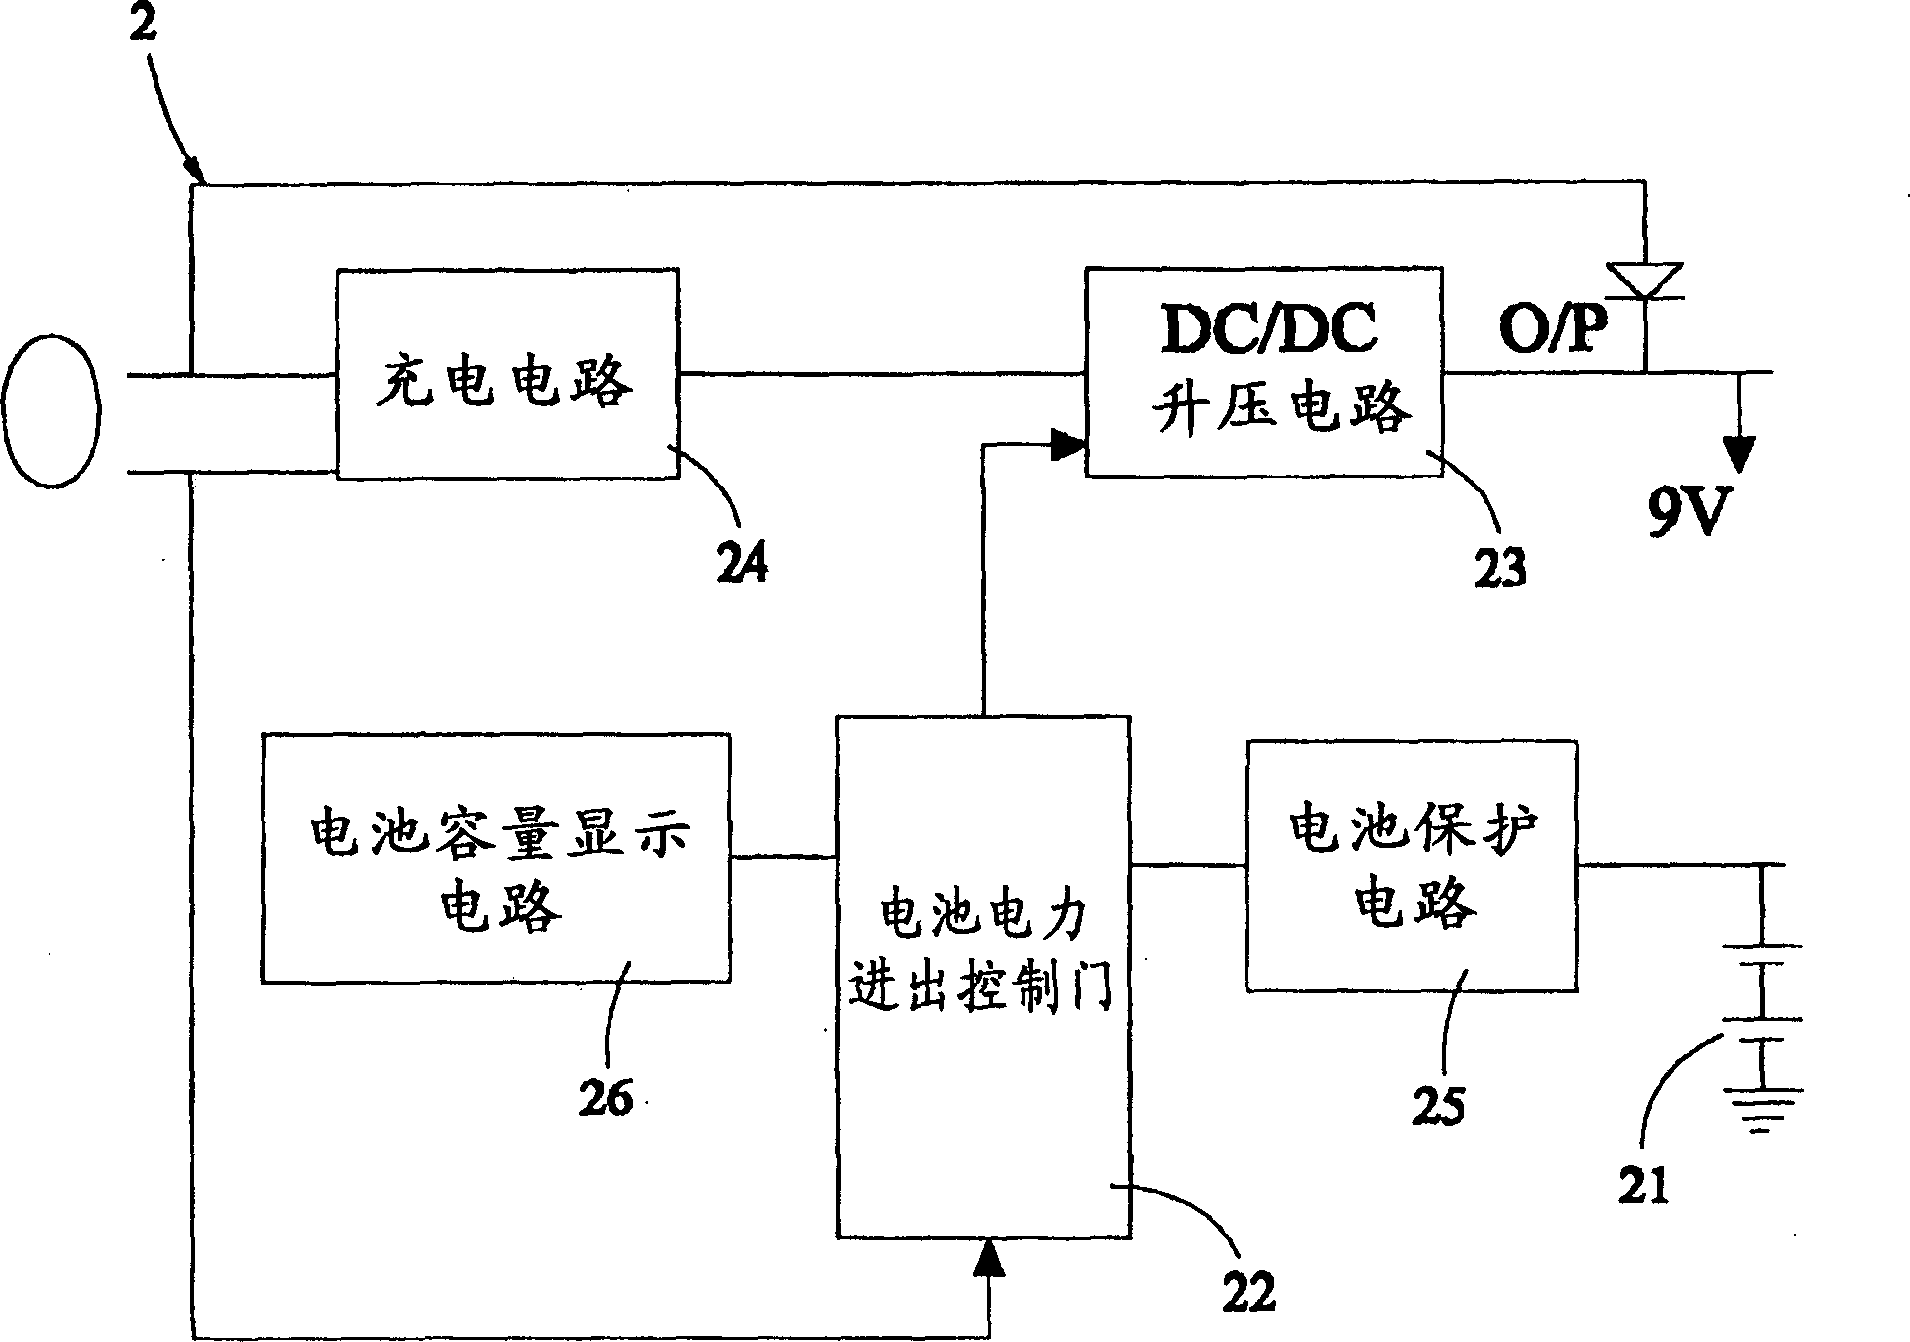 Portable power supply unit concurrently having transmission interface and charging system